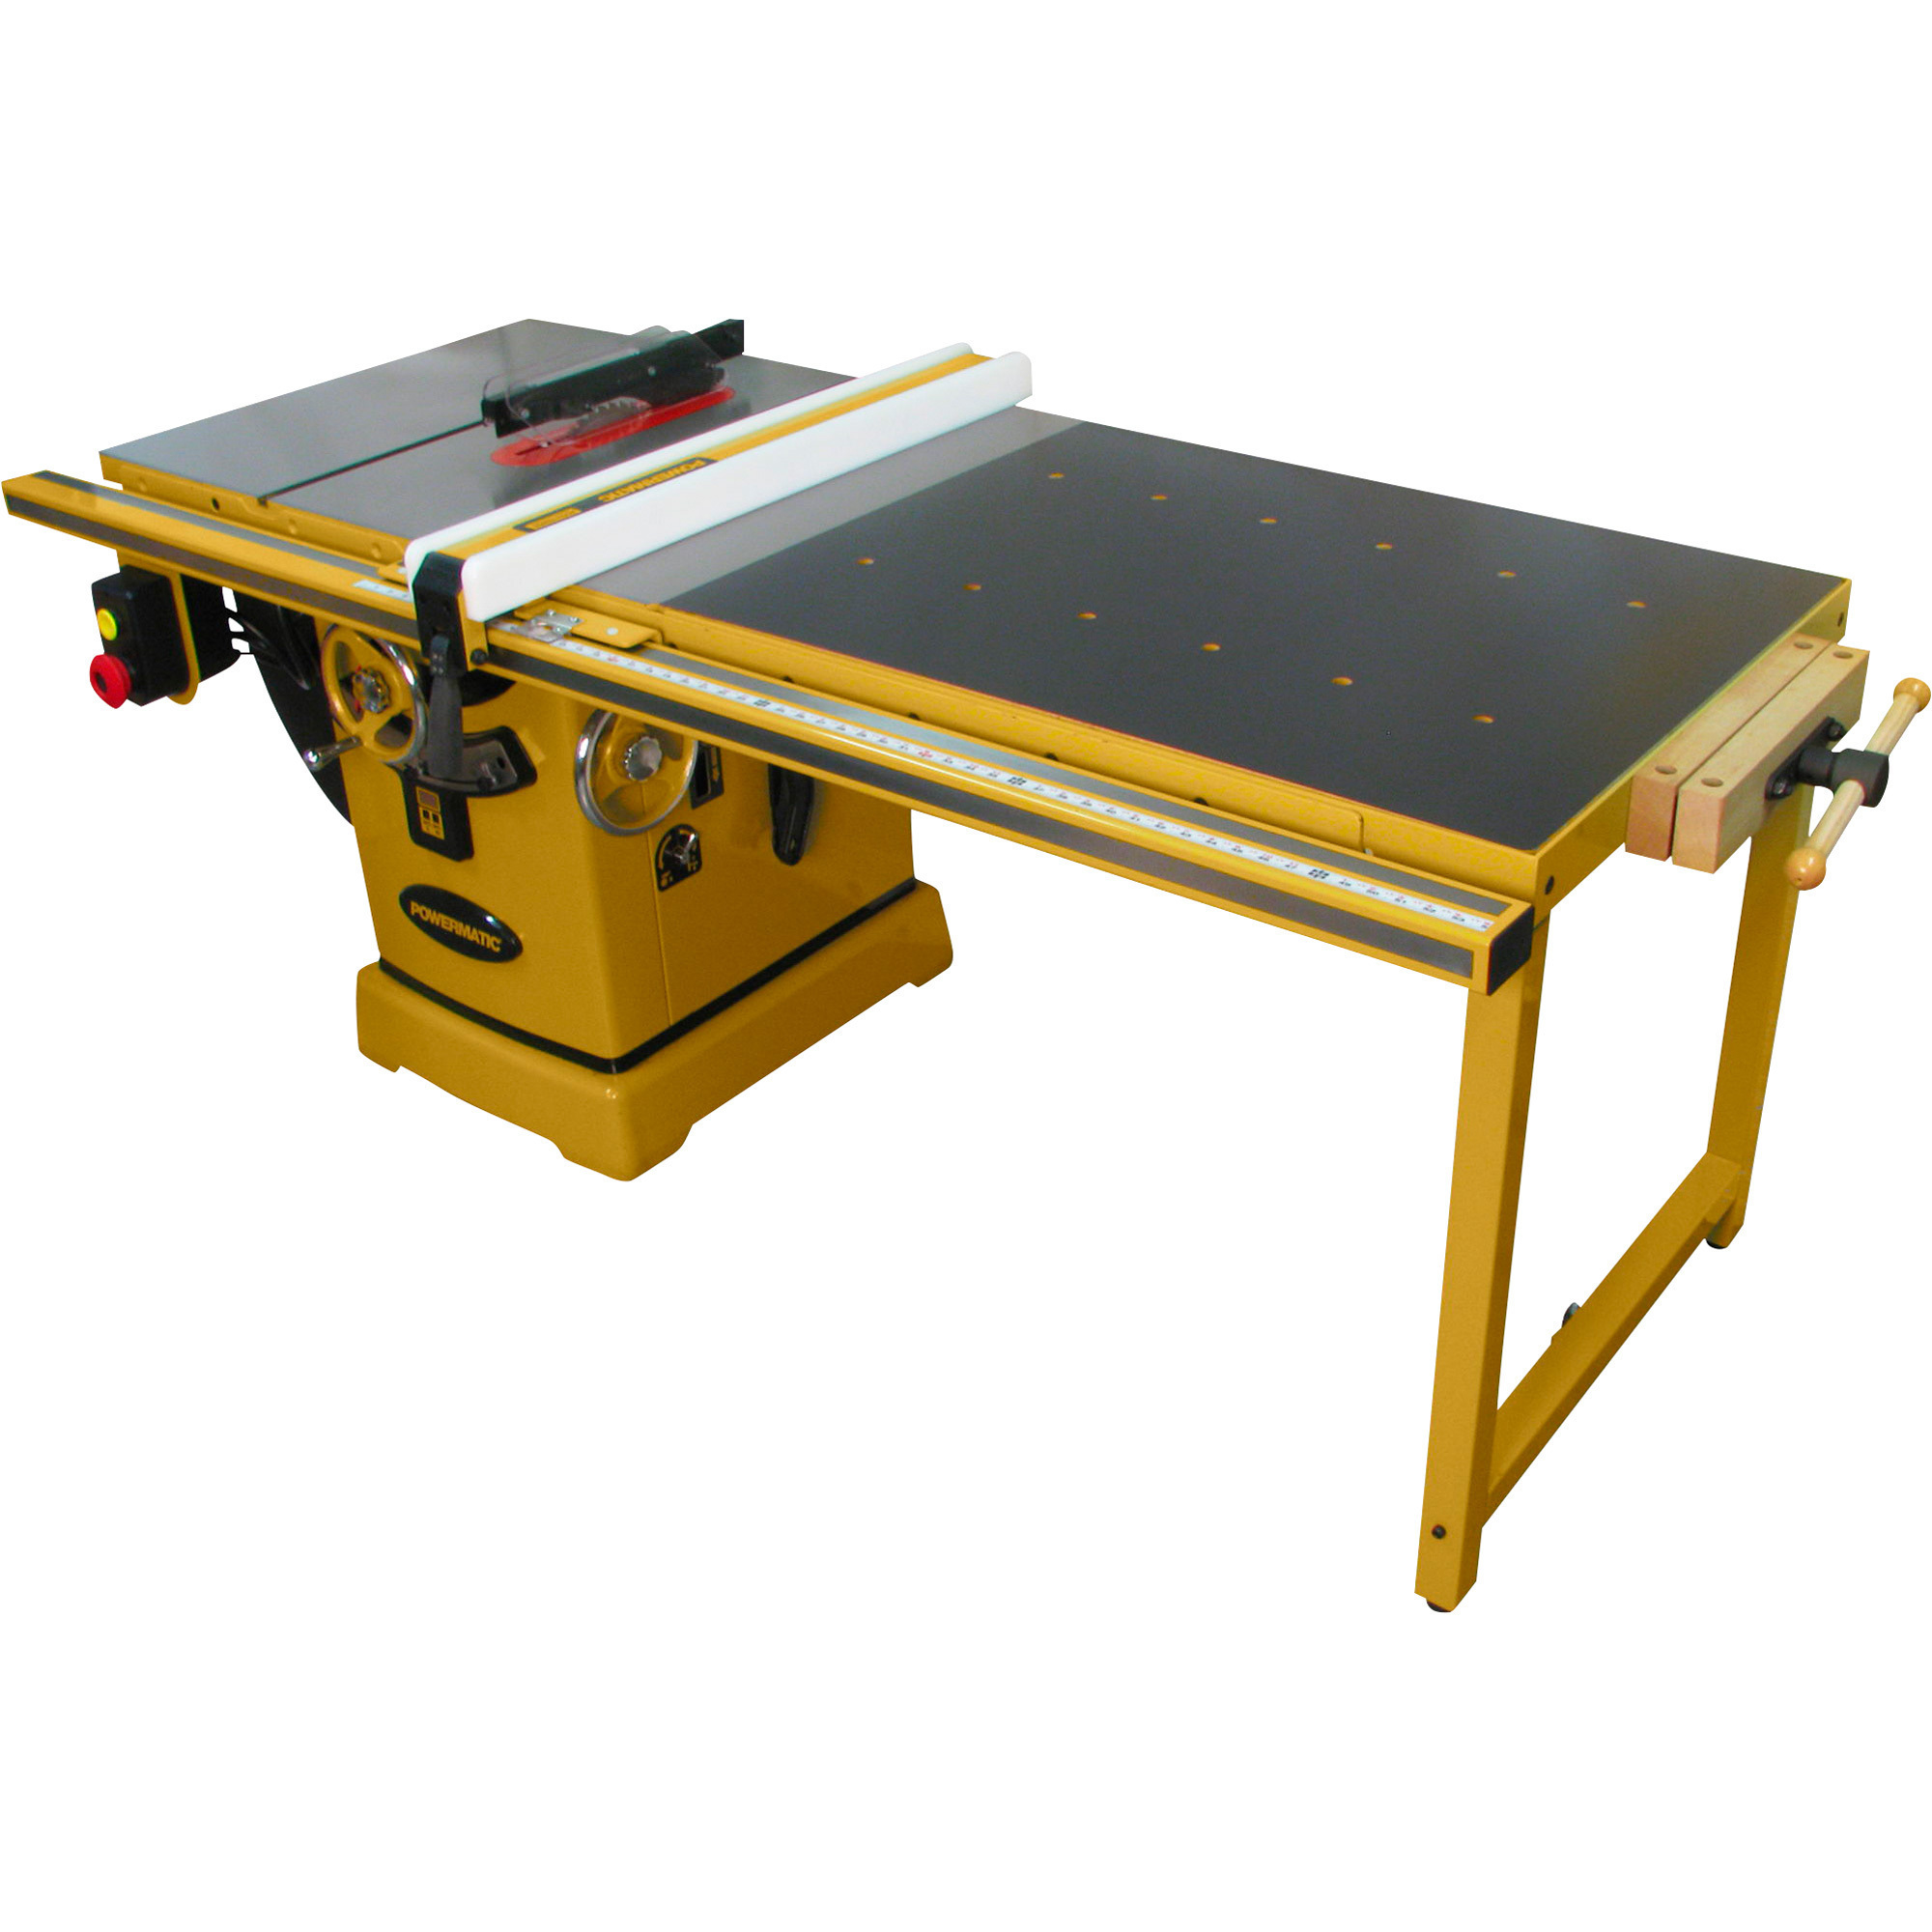 Powermatic Table Saw, 5HP, 1PH, 230V, 50Inch Rip, With Accu-Fence and Workbench, Model PM2000B